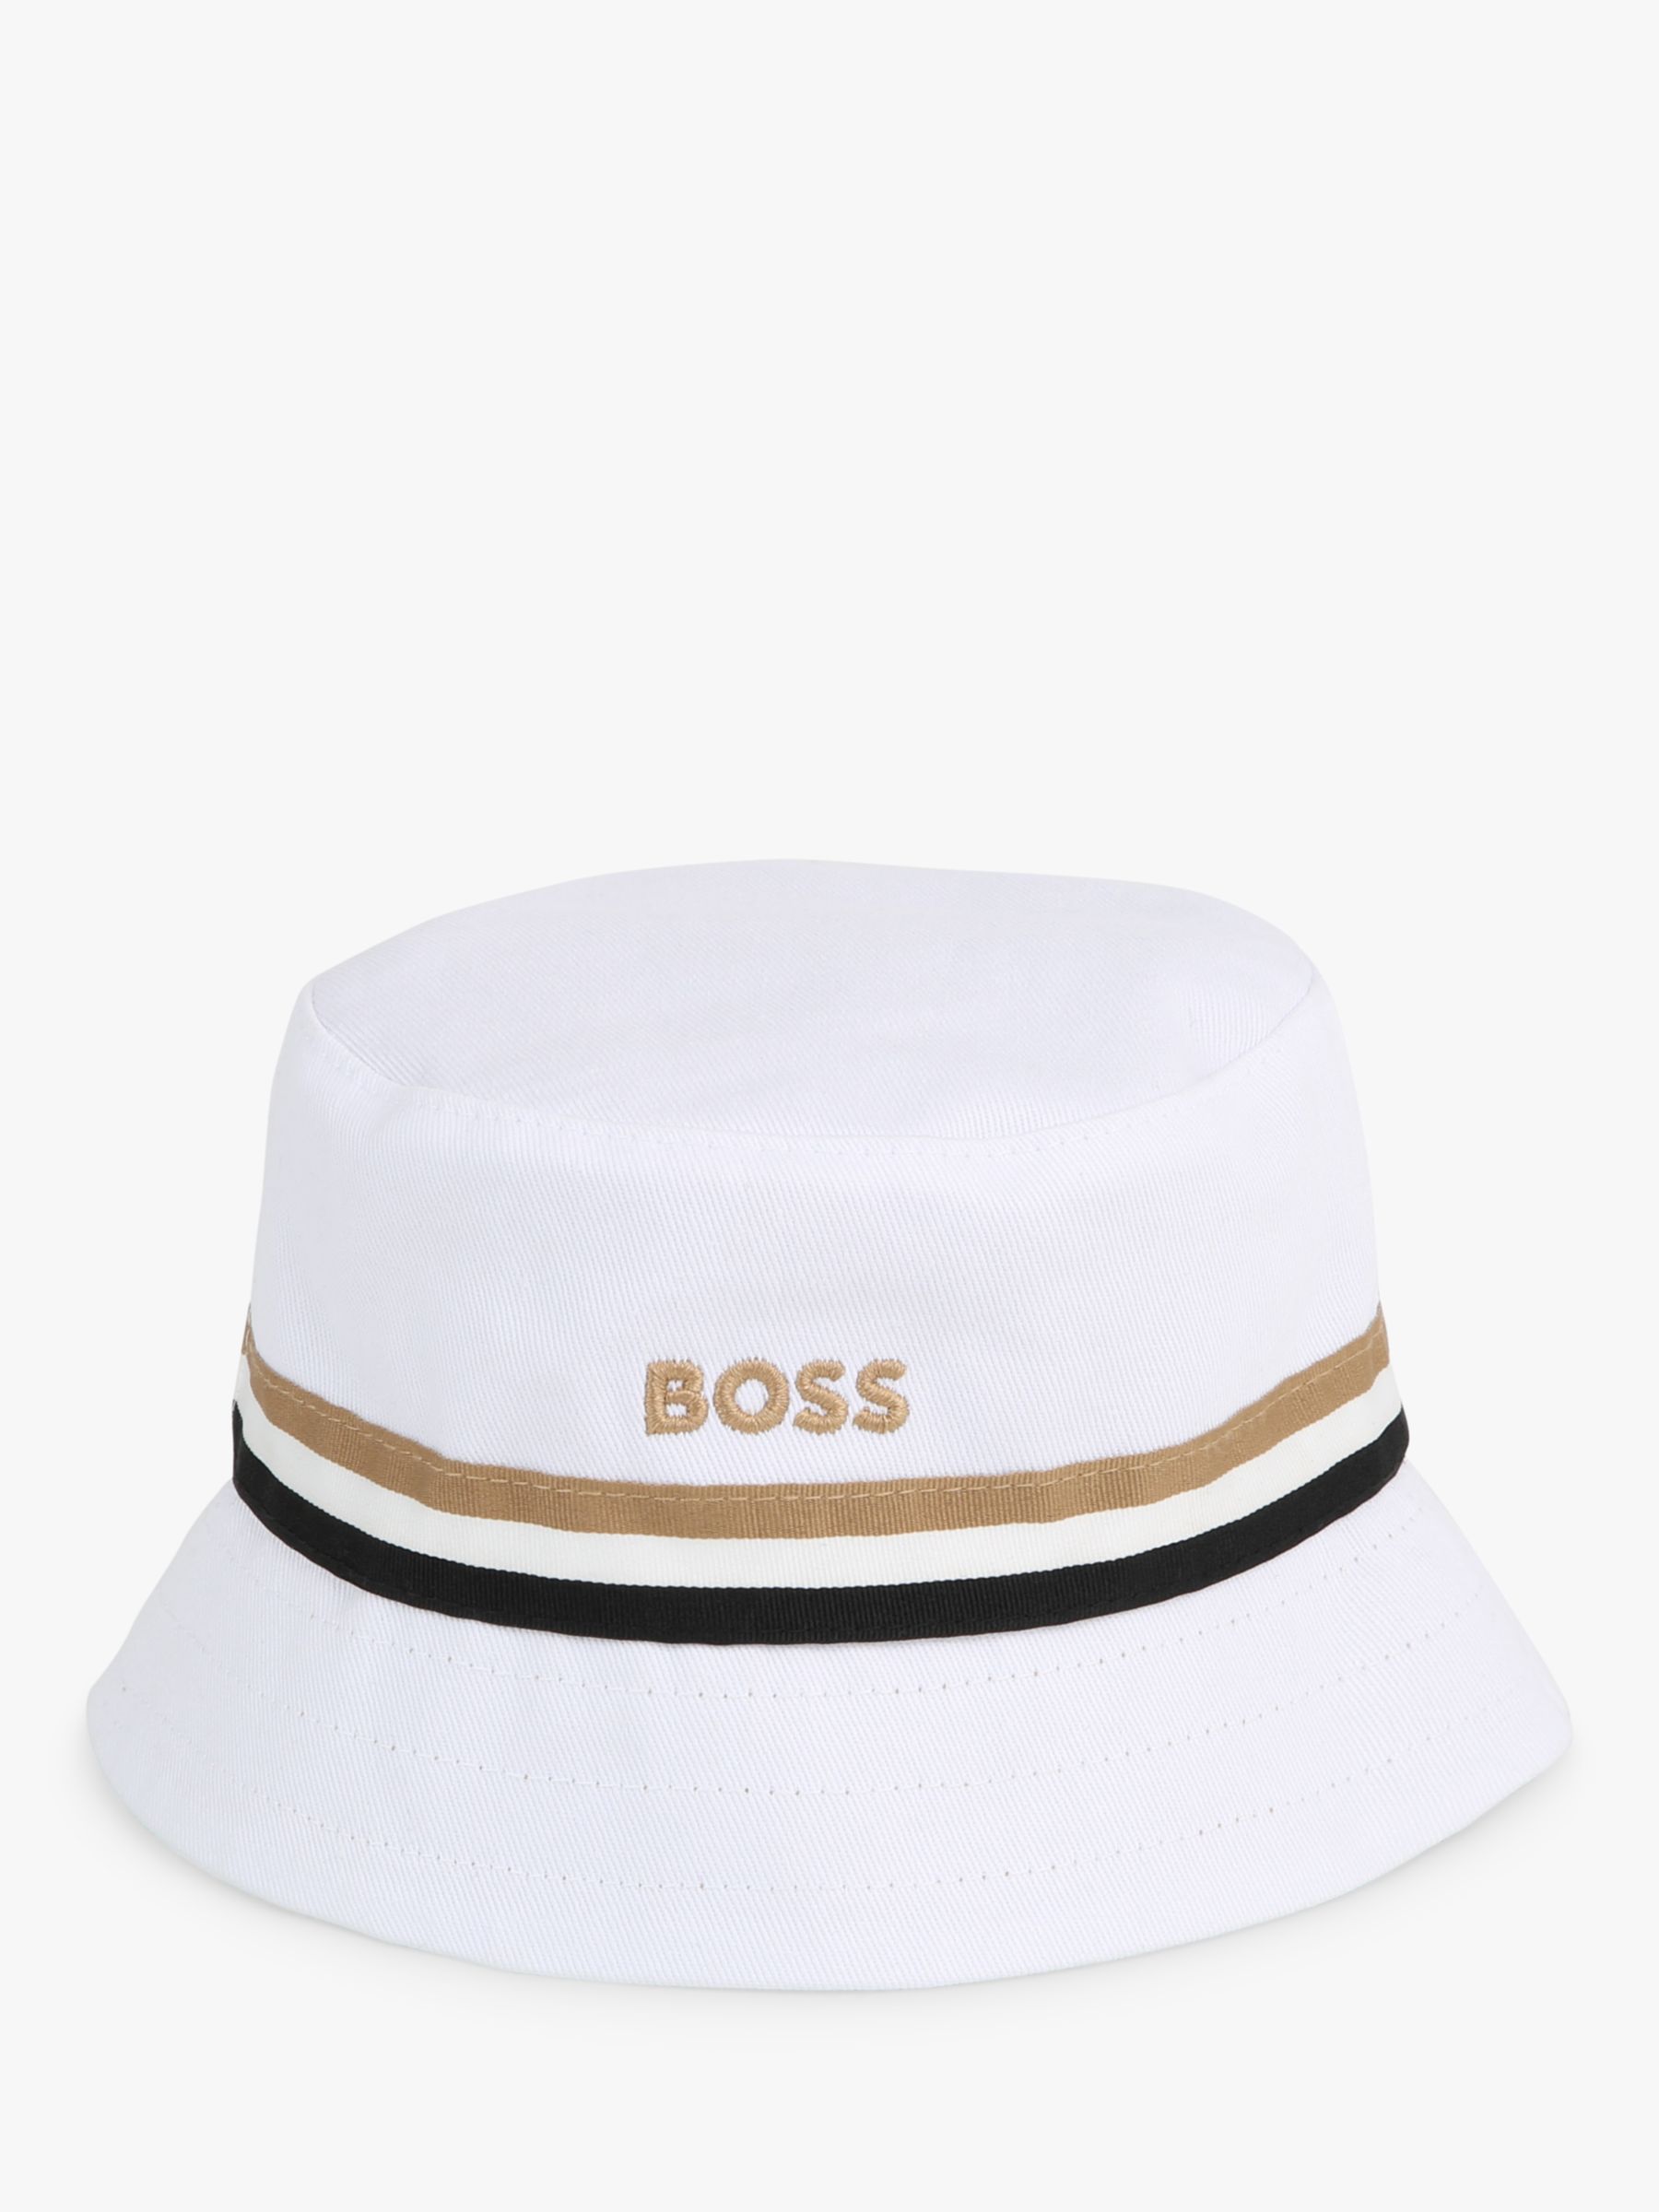 BOSS Baby Reversible Bucket Hat, White/Brown, 3-6 months